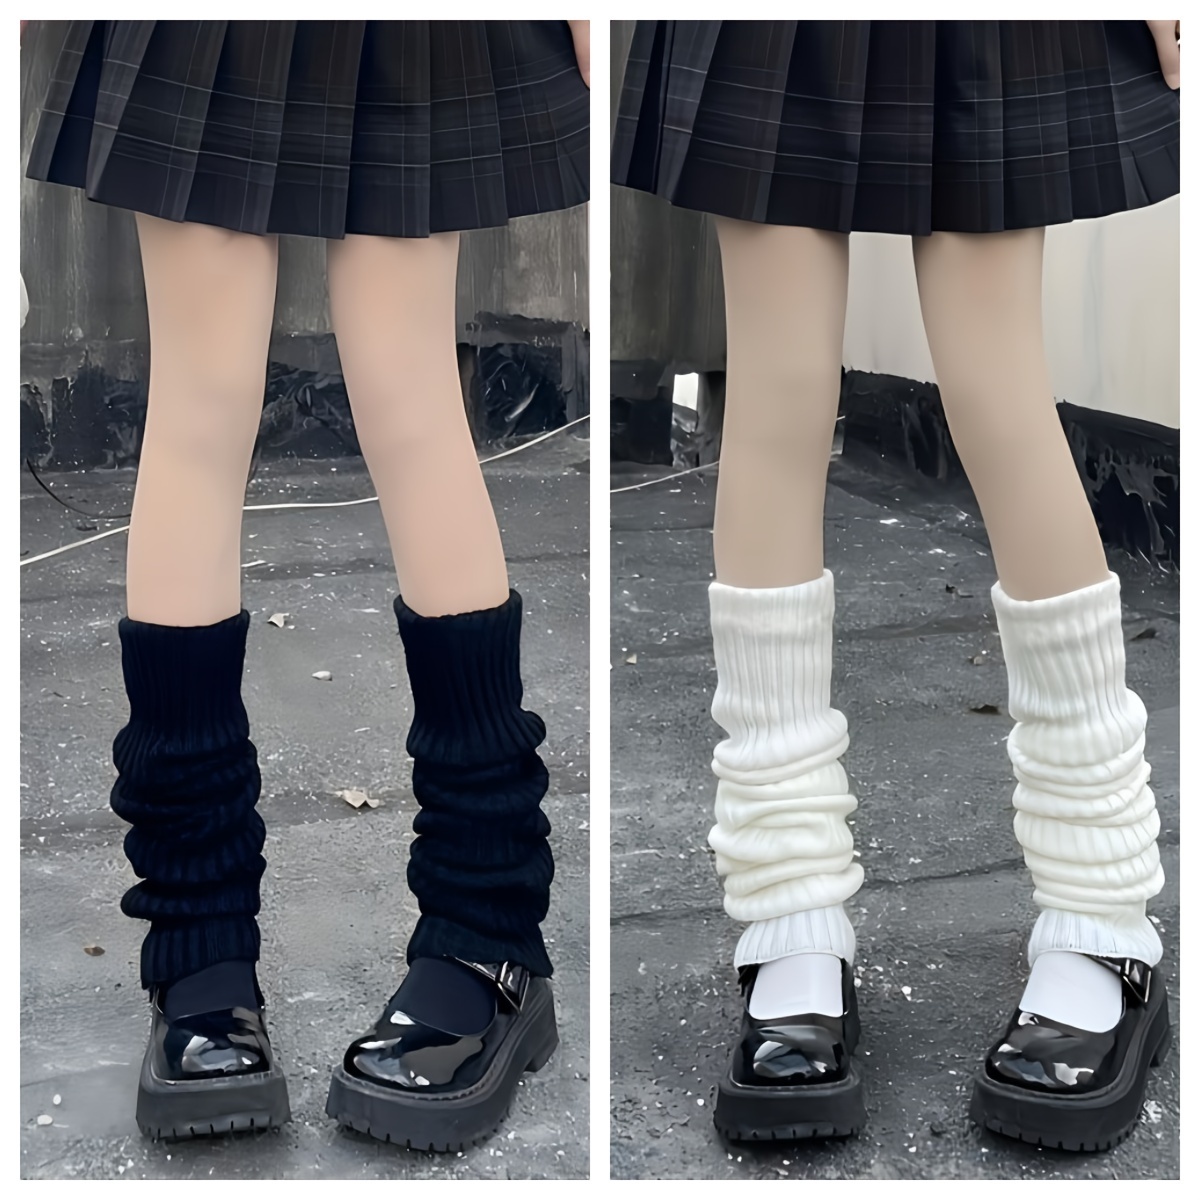 

2 Pairs Solid Knitted Leg Warmers, Y2k Harajuku Style Knee High Socks For Autumn/winter, Women's Stockings & Hosiery